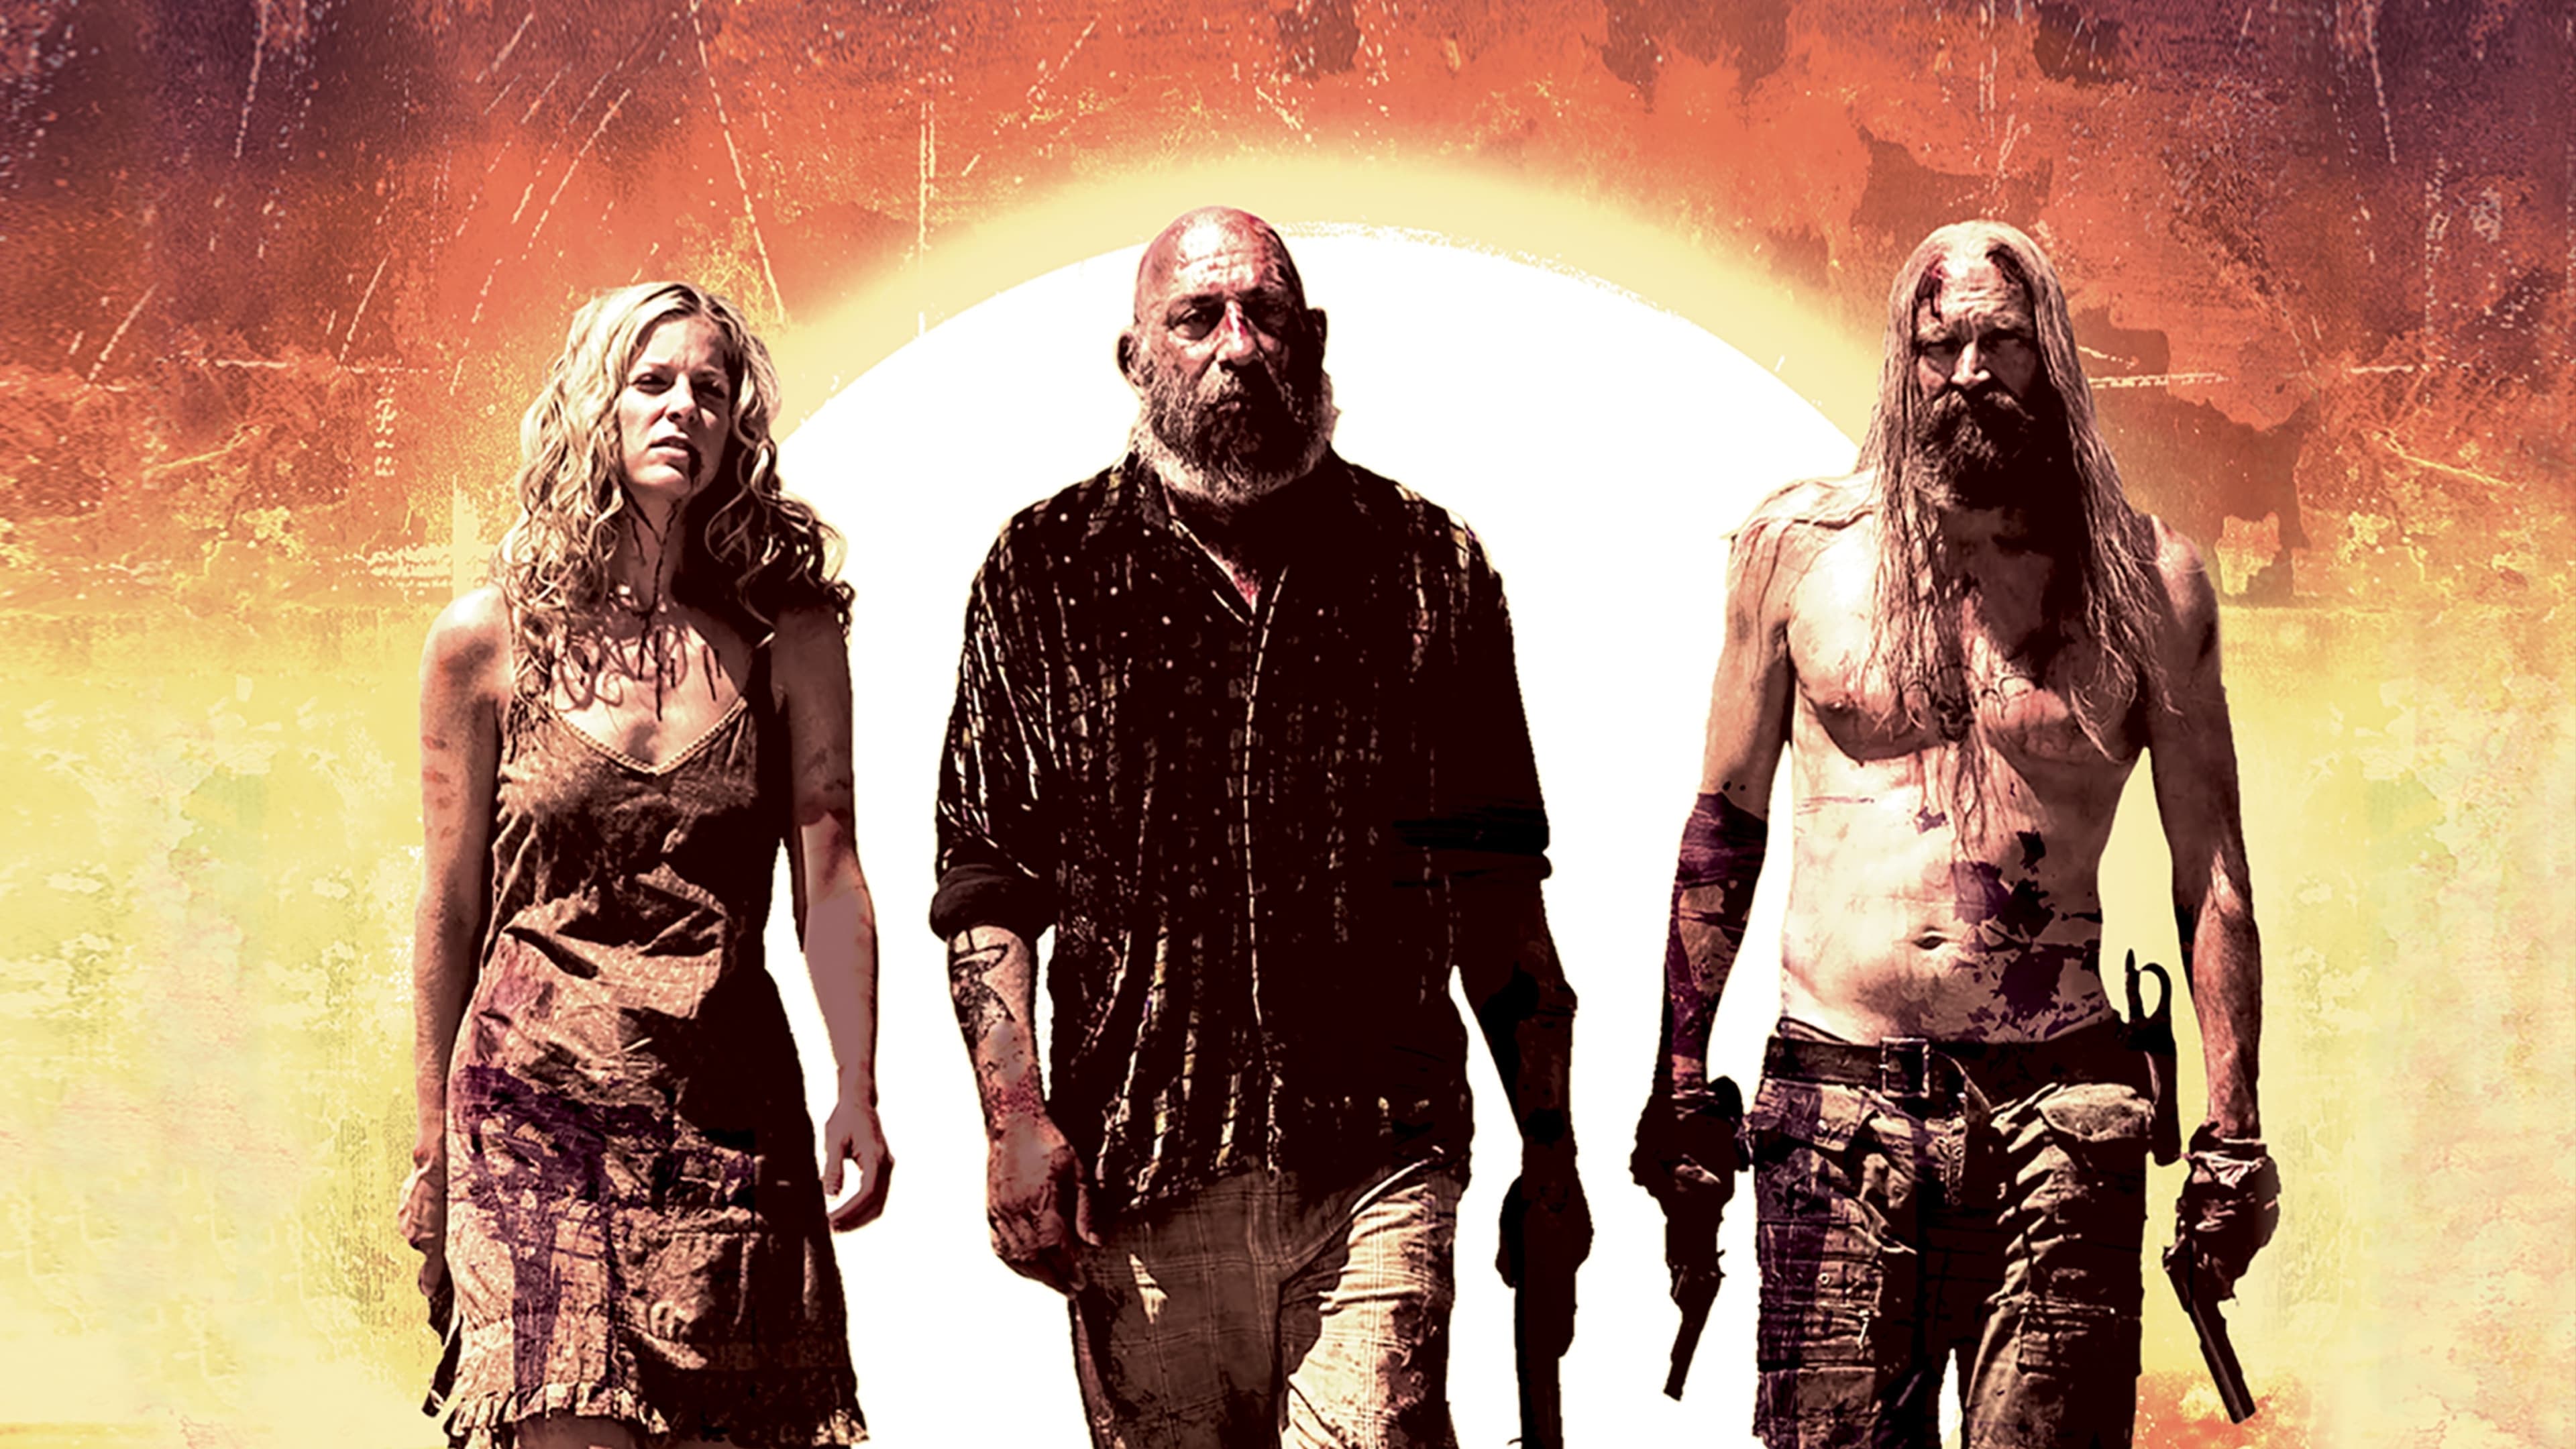 The Devil’s Rejects